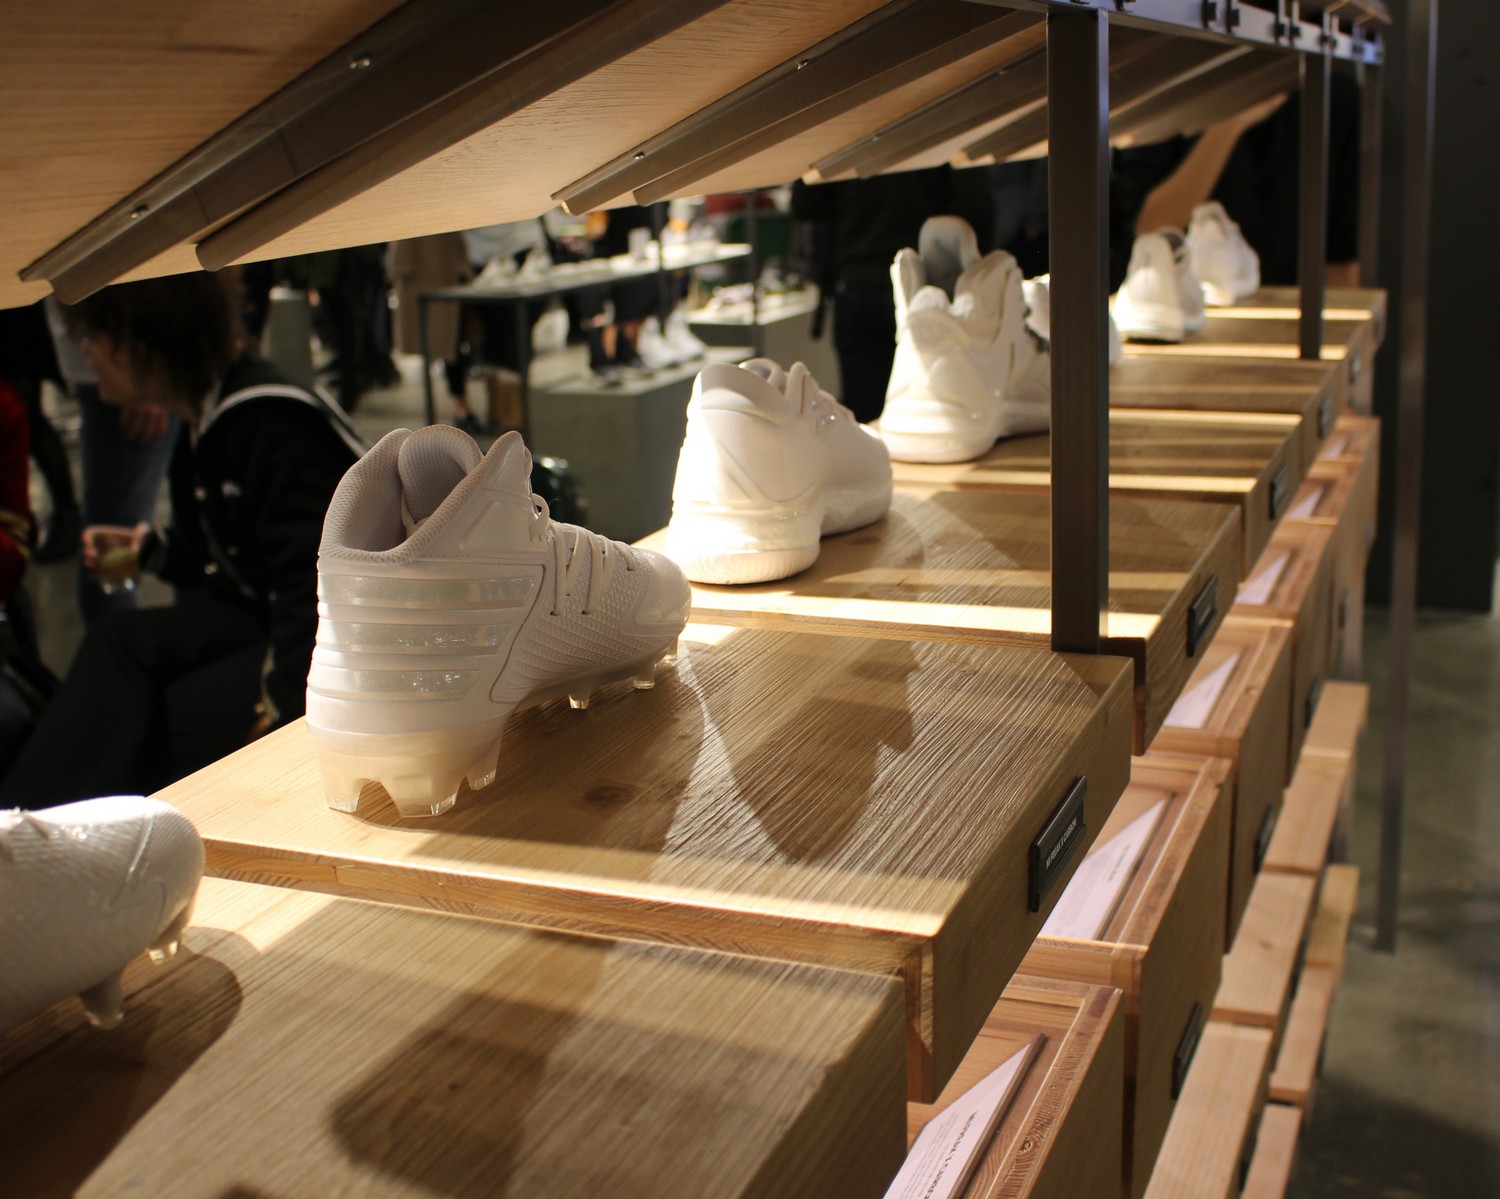 Adidas opens its flagship store in New York and we're there.